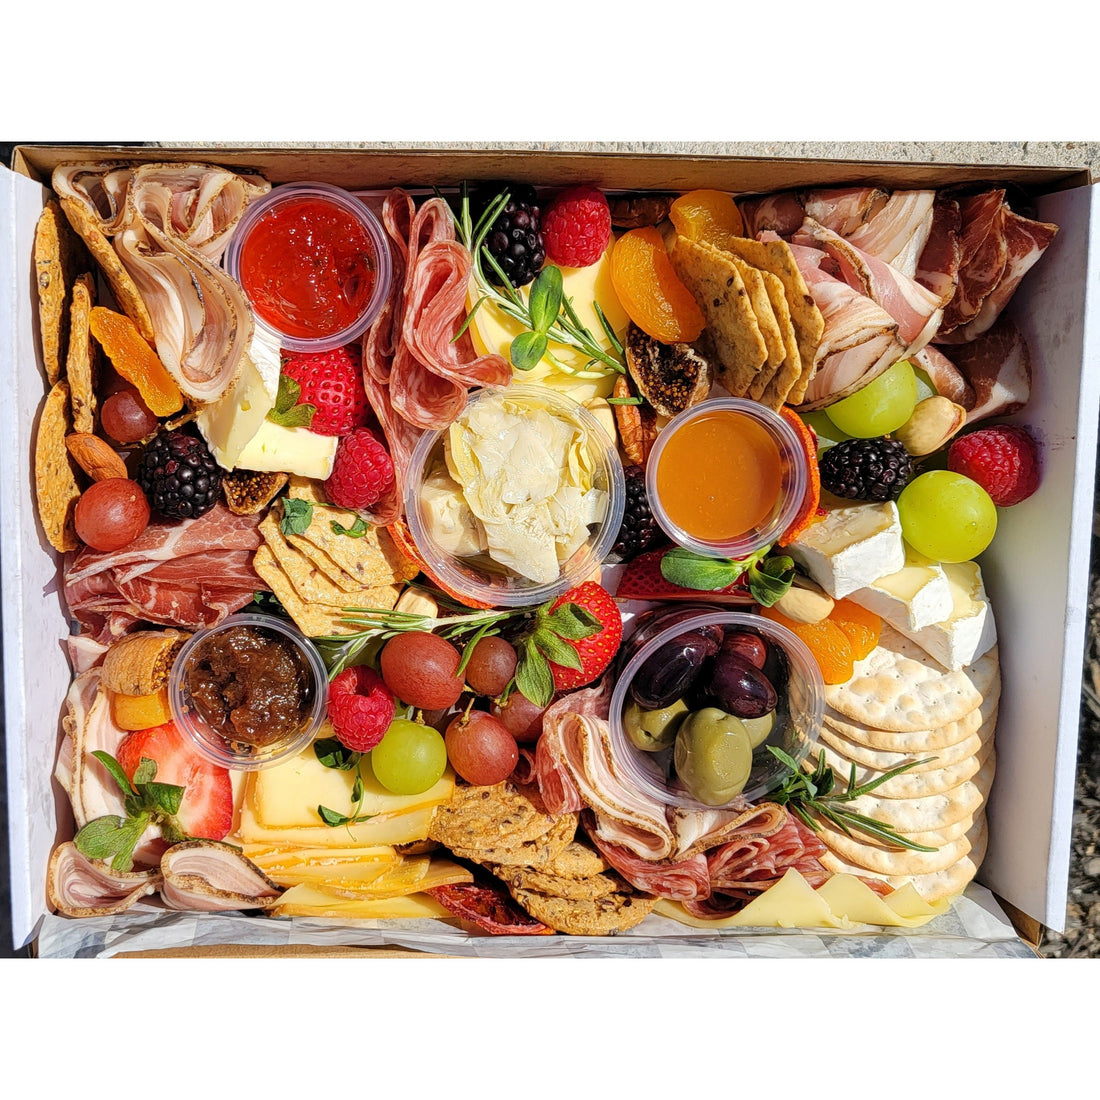 Charcuterie Box to Go! LARGE